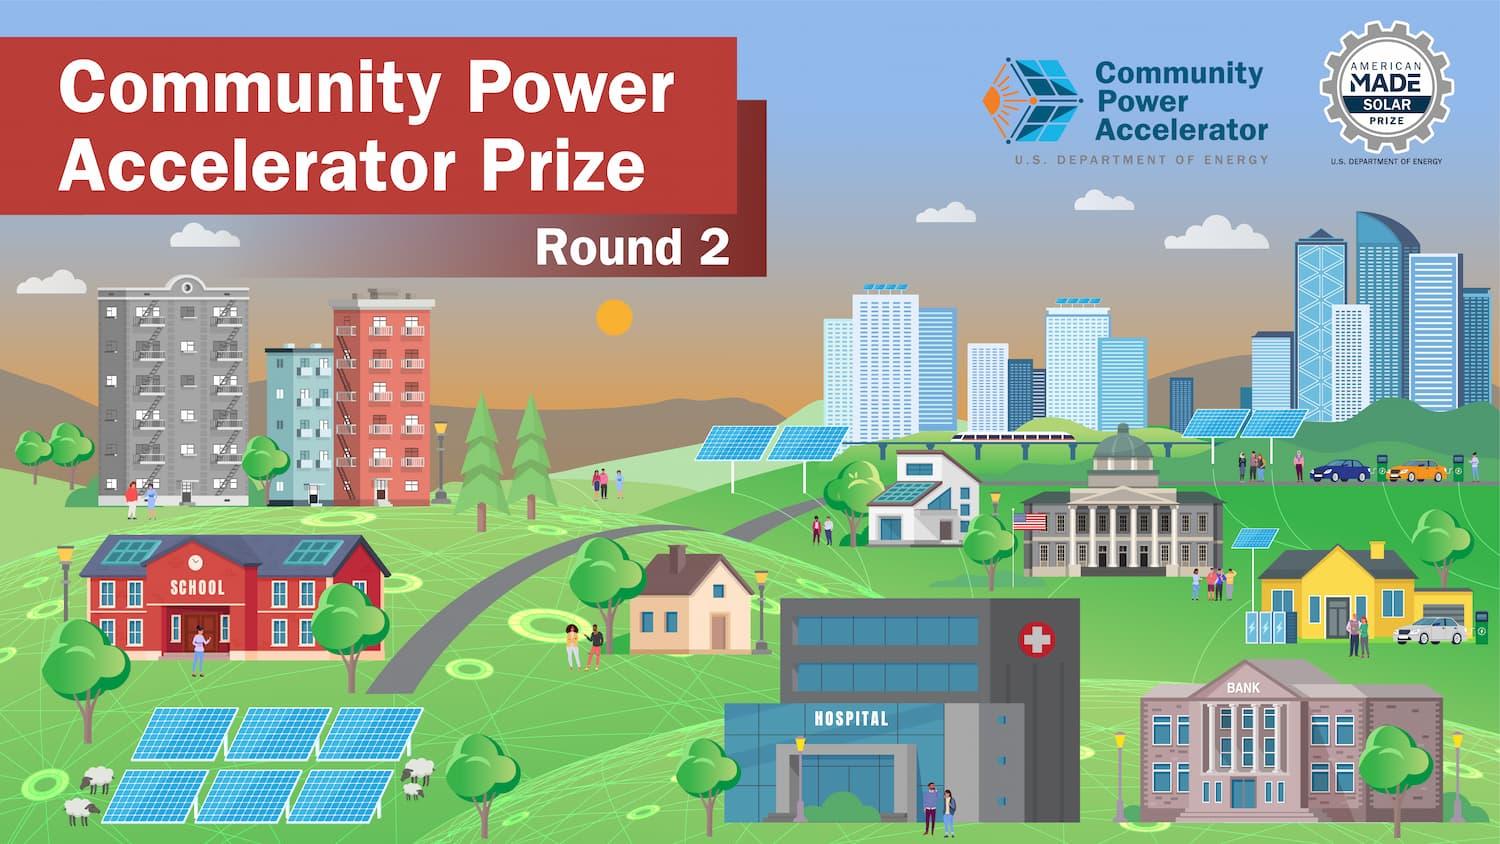 a graphic illustration of a small community powered by solar. With text that says Community Power Accelerator, American-Made Solar Prize.